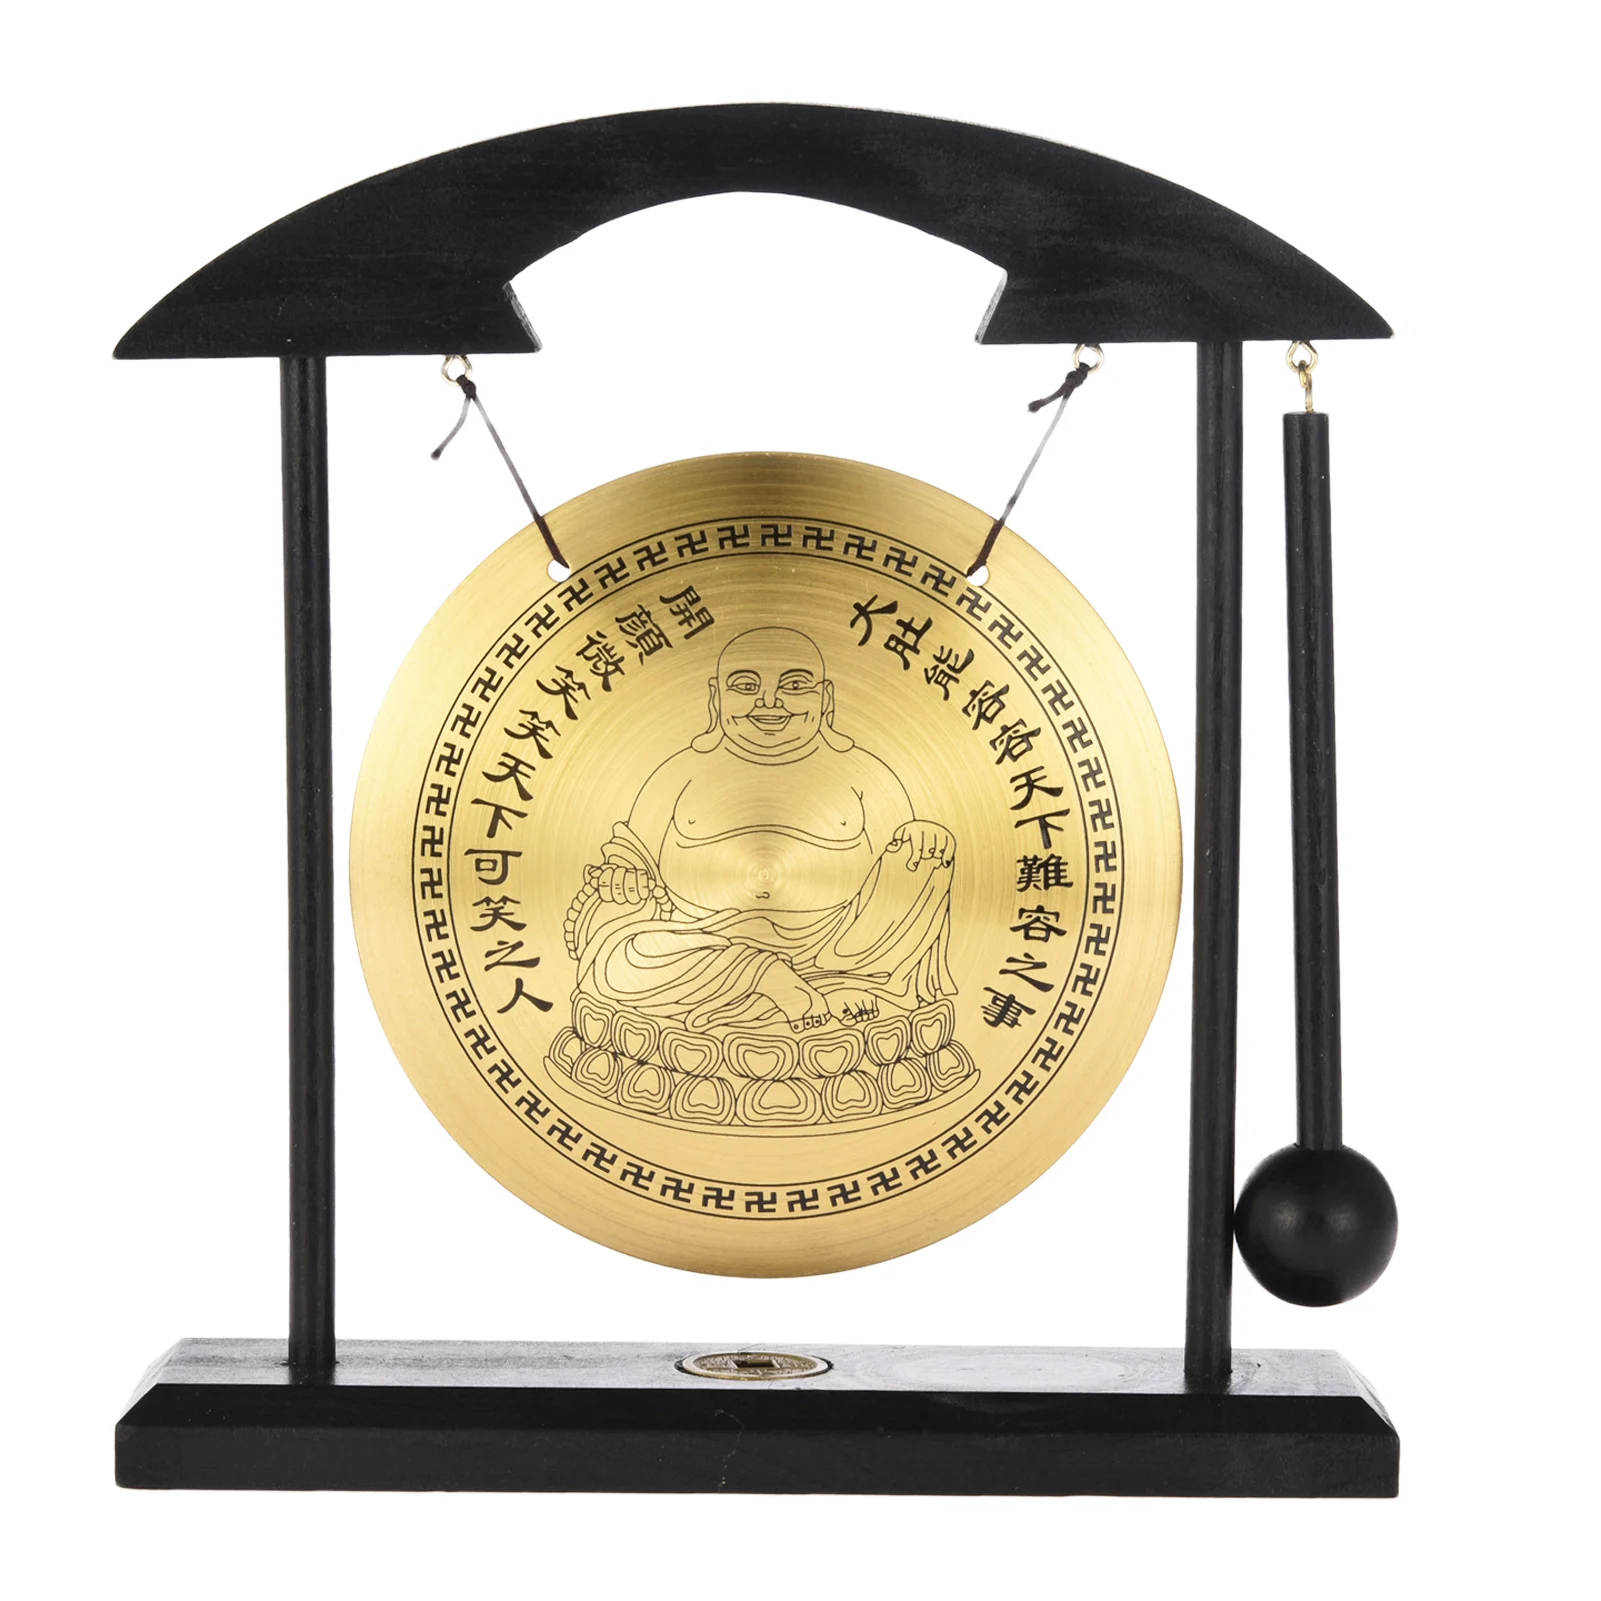 

Zen Art Table Gong Feng Shui Desktop Gong Chinese Decor Brass Gong Percussion Instrument With Wooden Chime For Home Decor 4.92